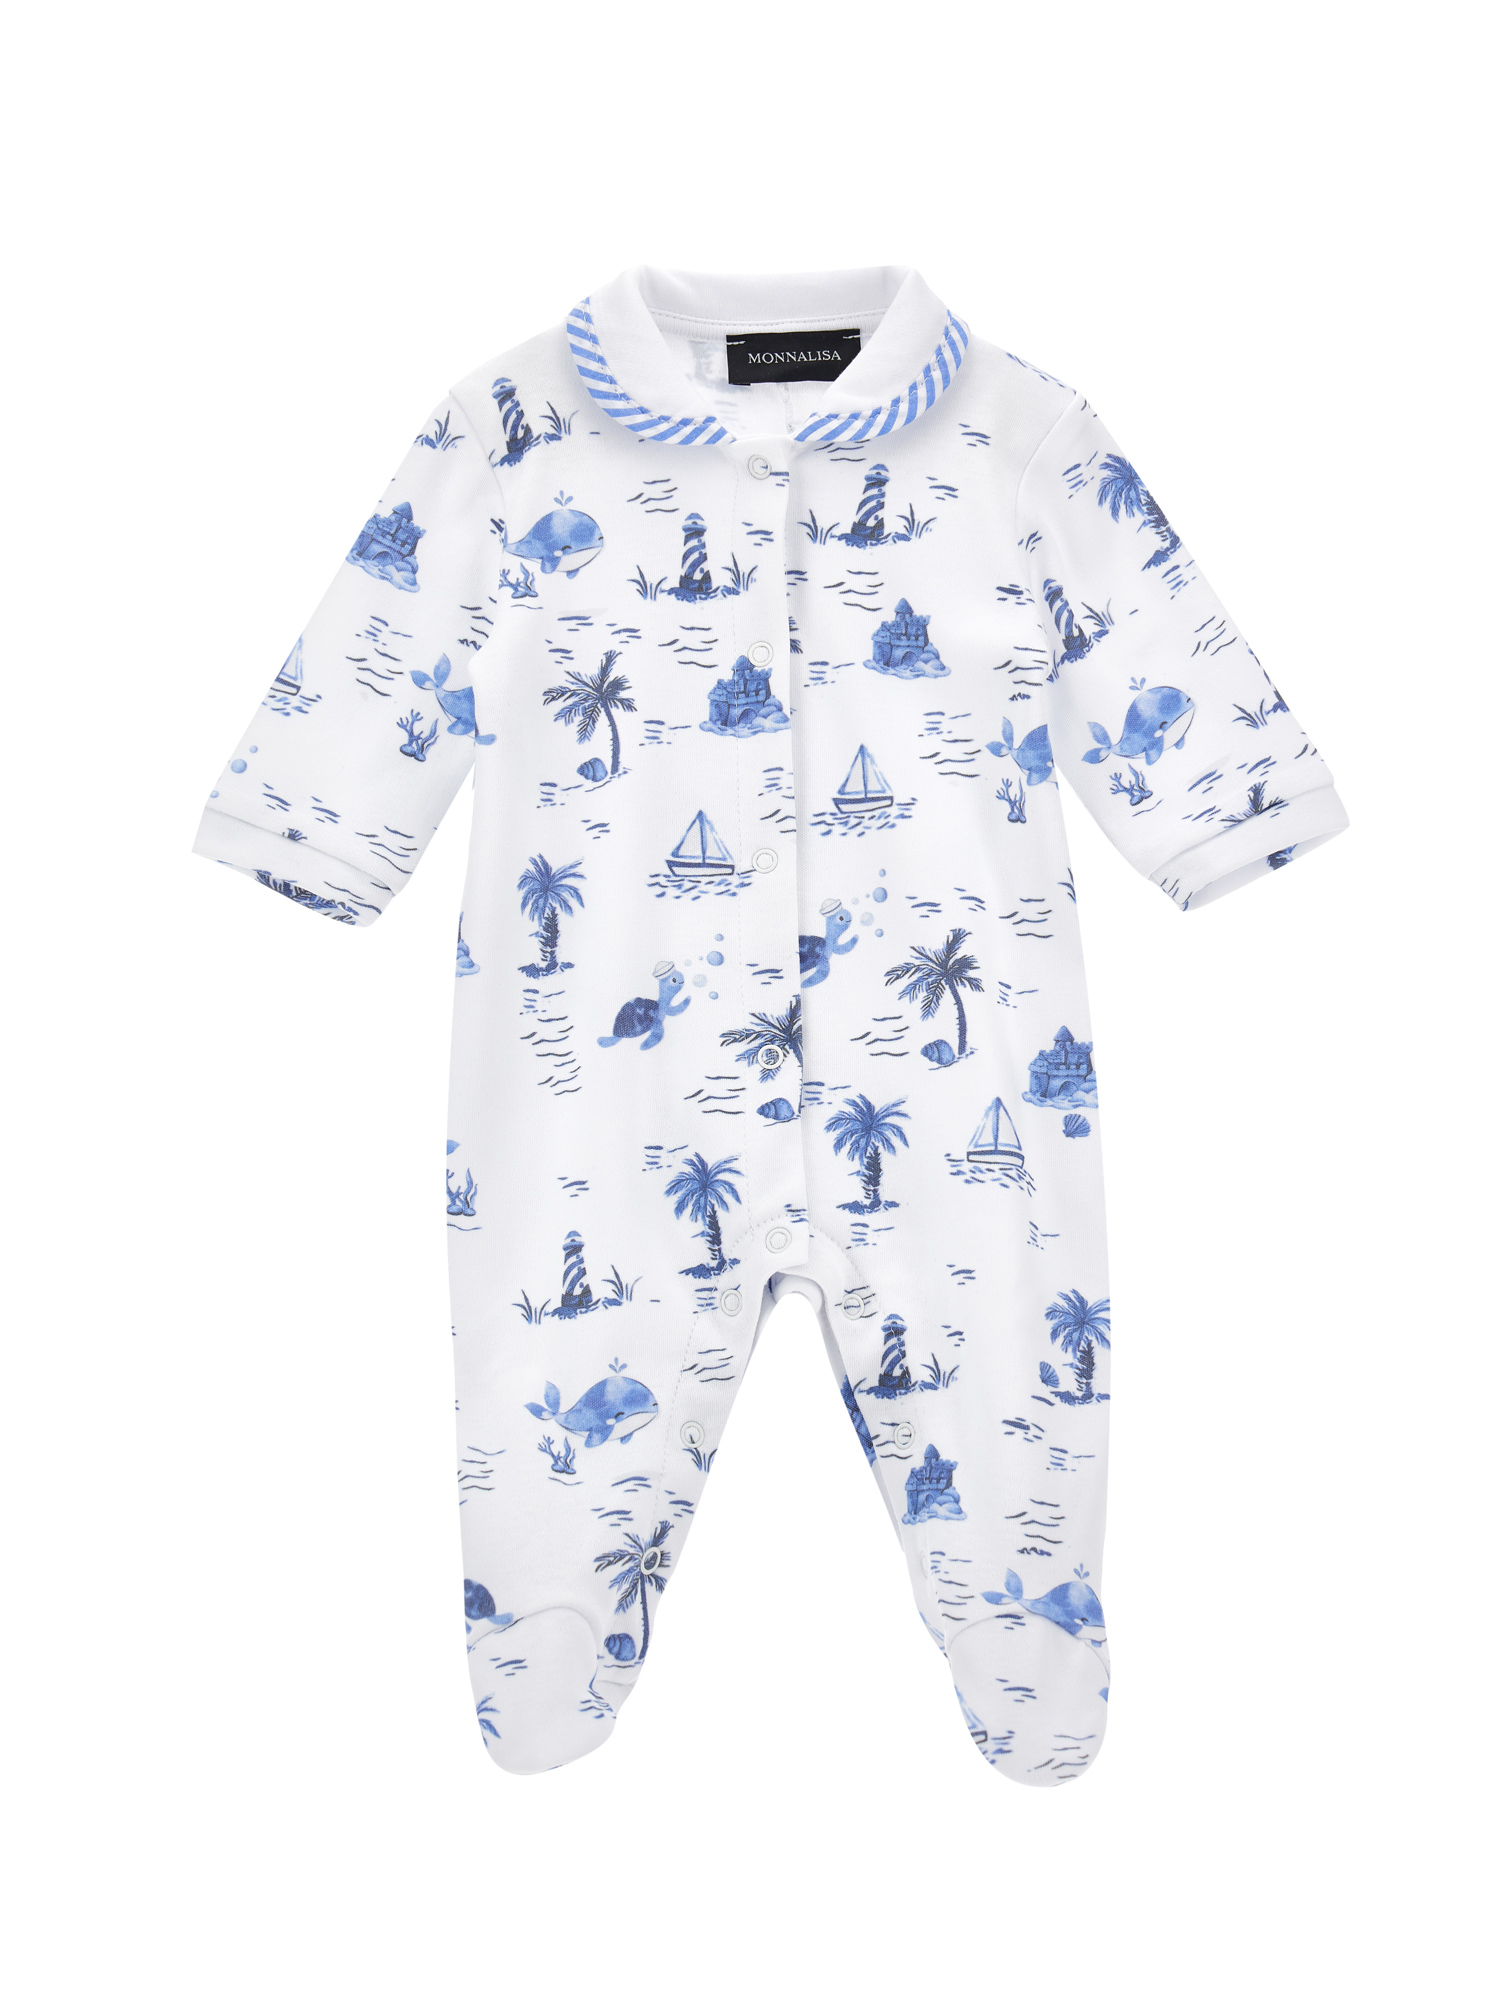 Monnalisa Babies'   Cotton Playsuit With Marine Print In White + Blue